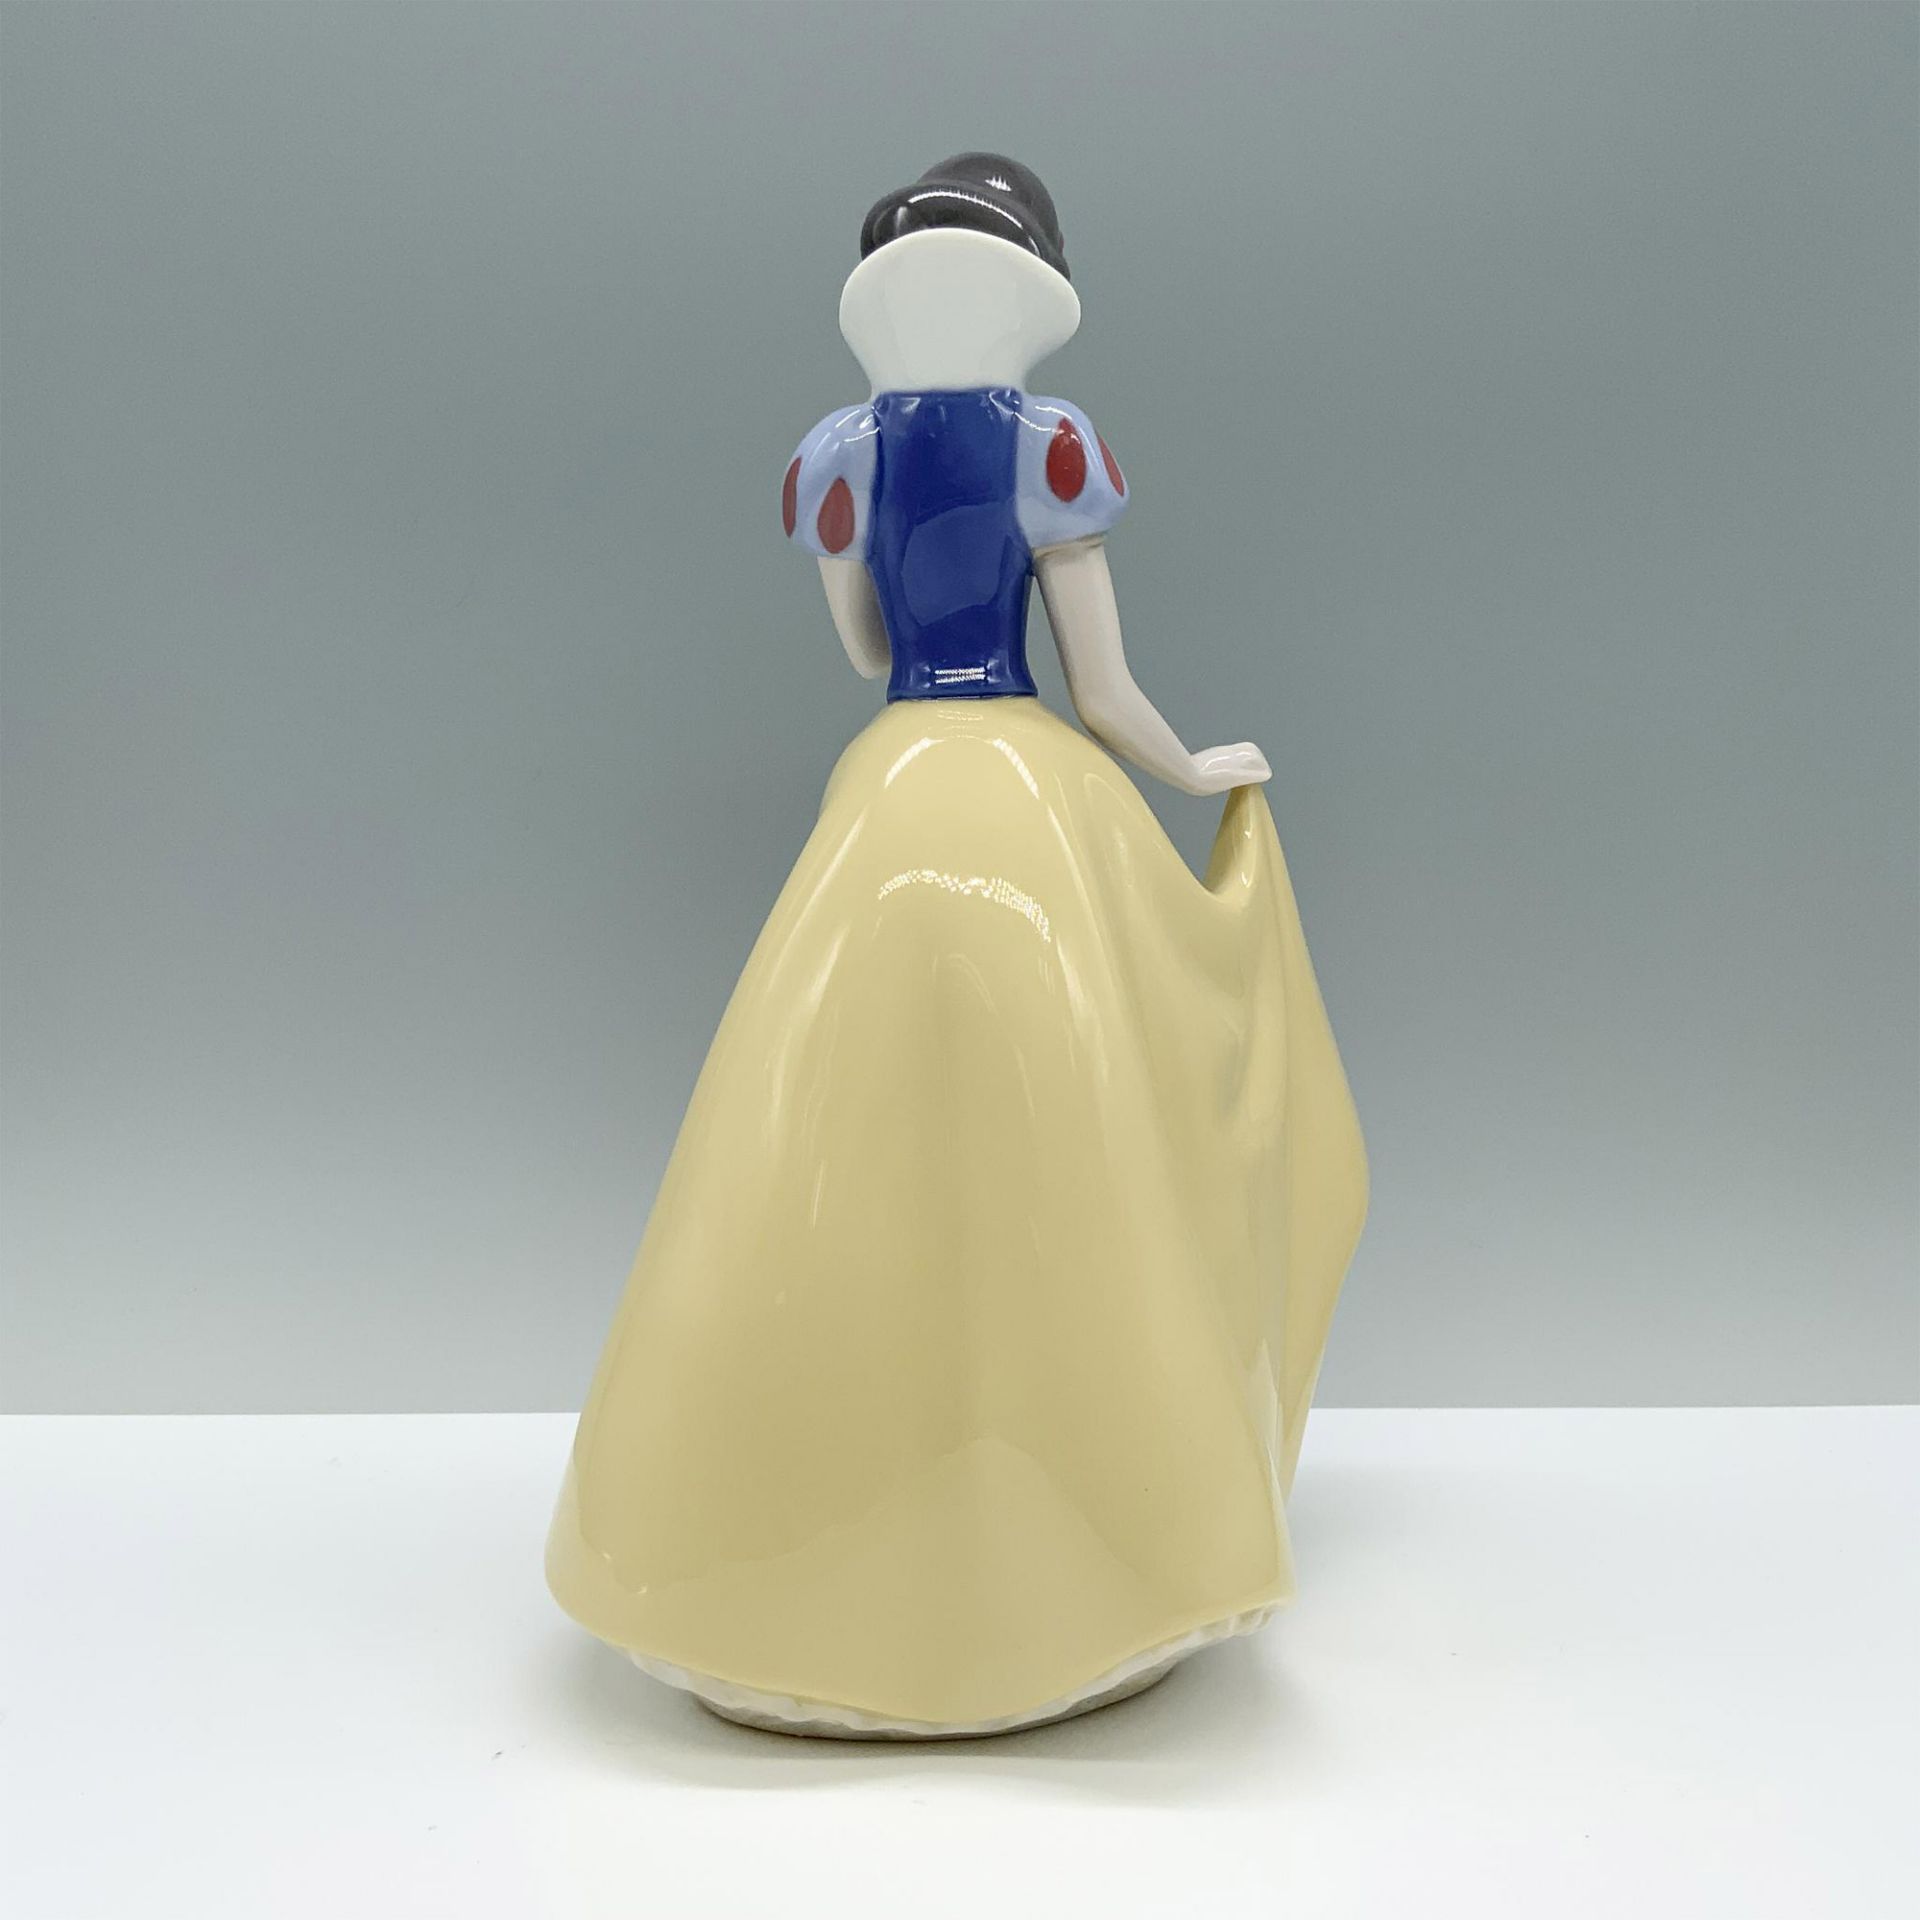 Nao by Lladro Porcelain Disney Figurine, Snow White - Image 2 of 3